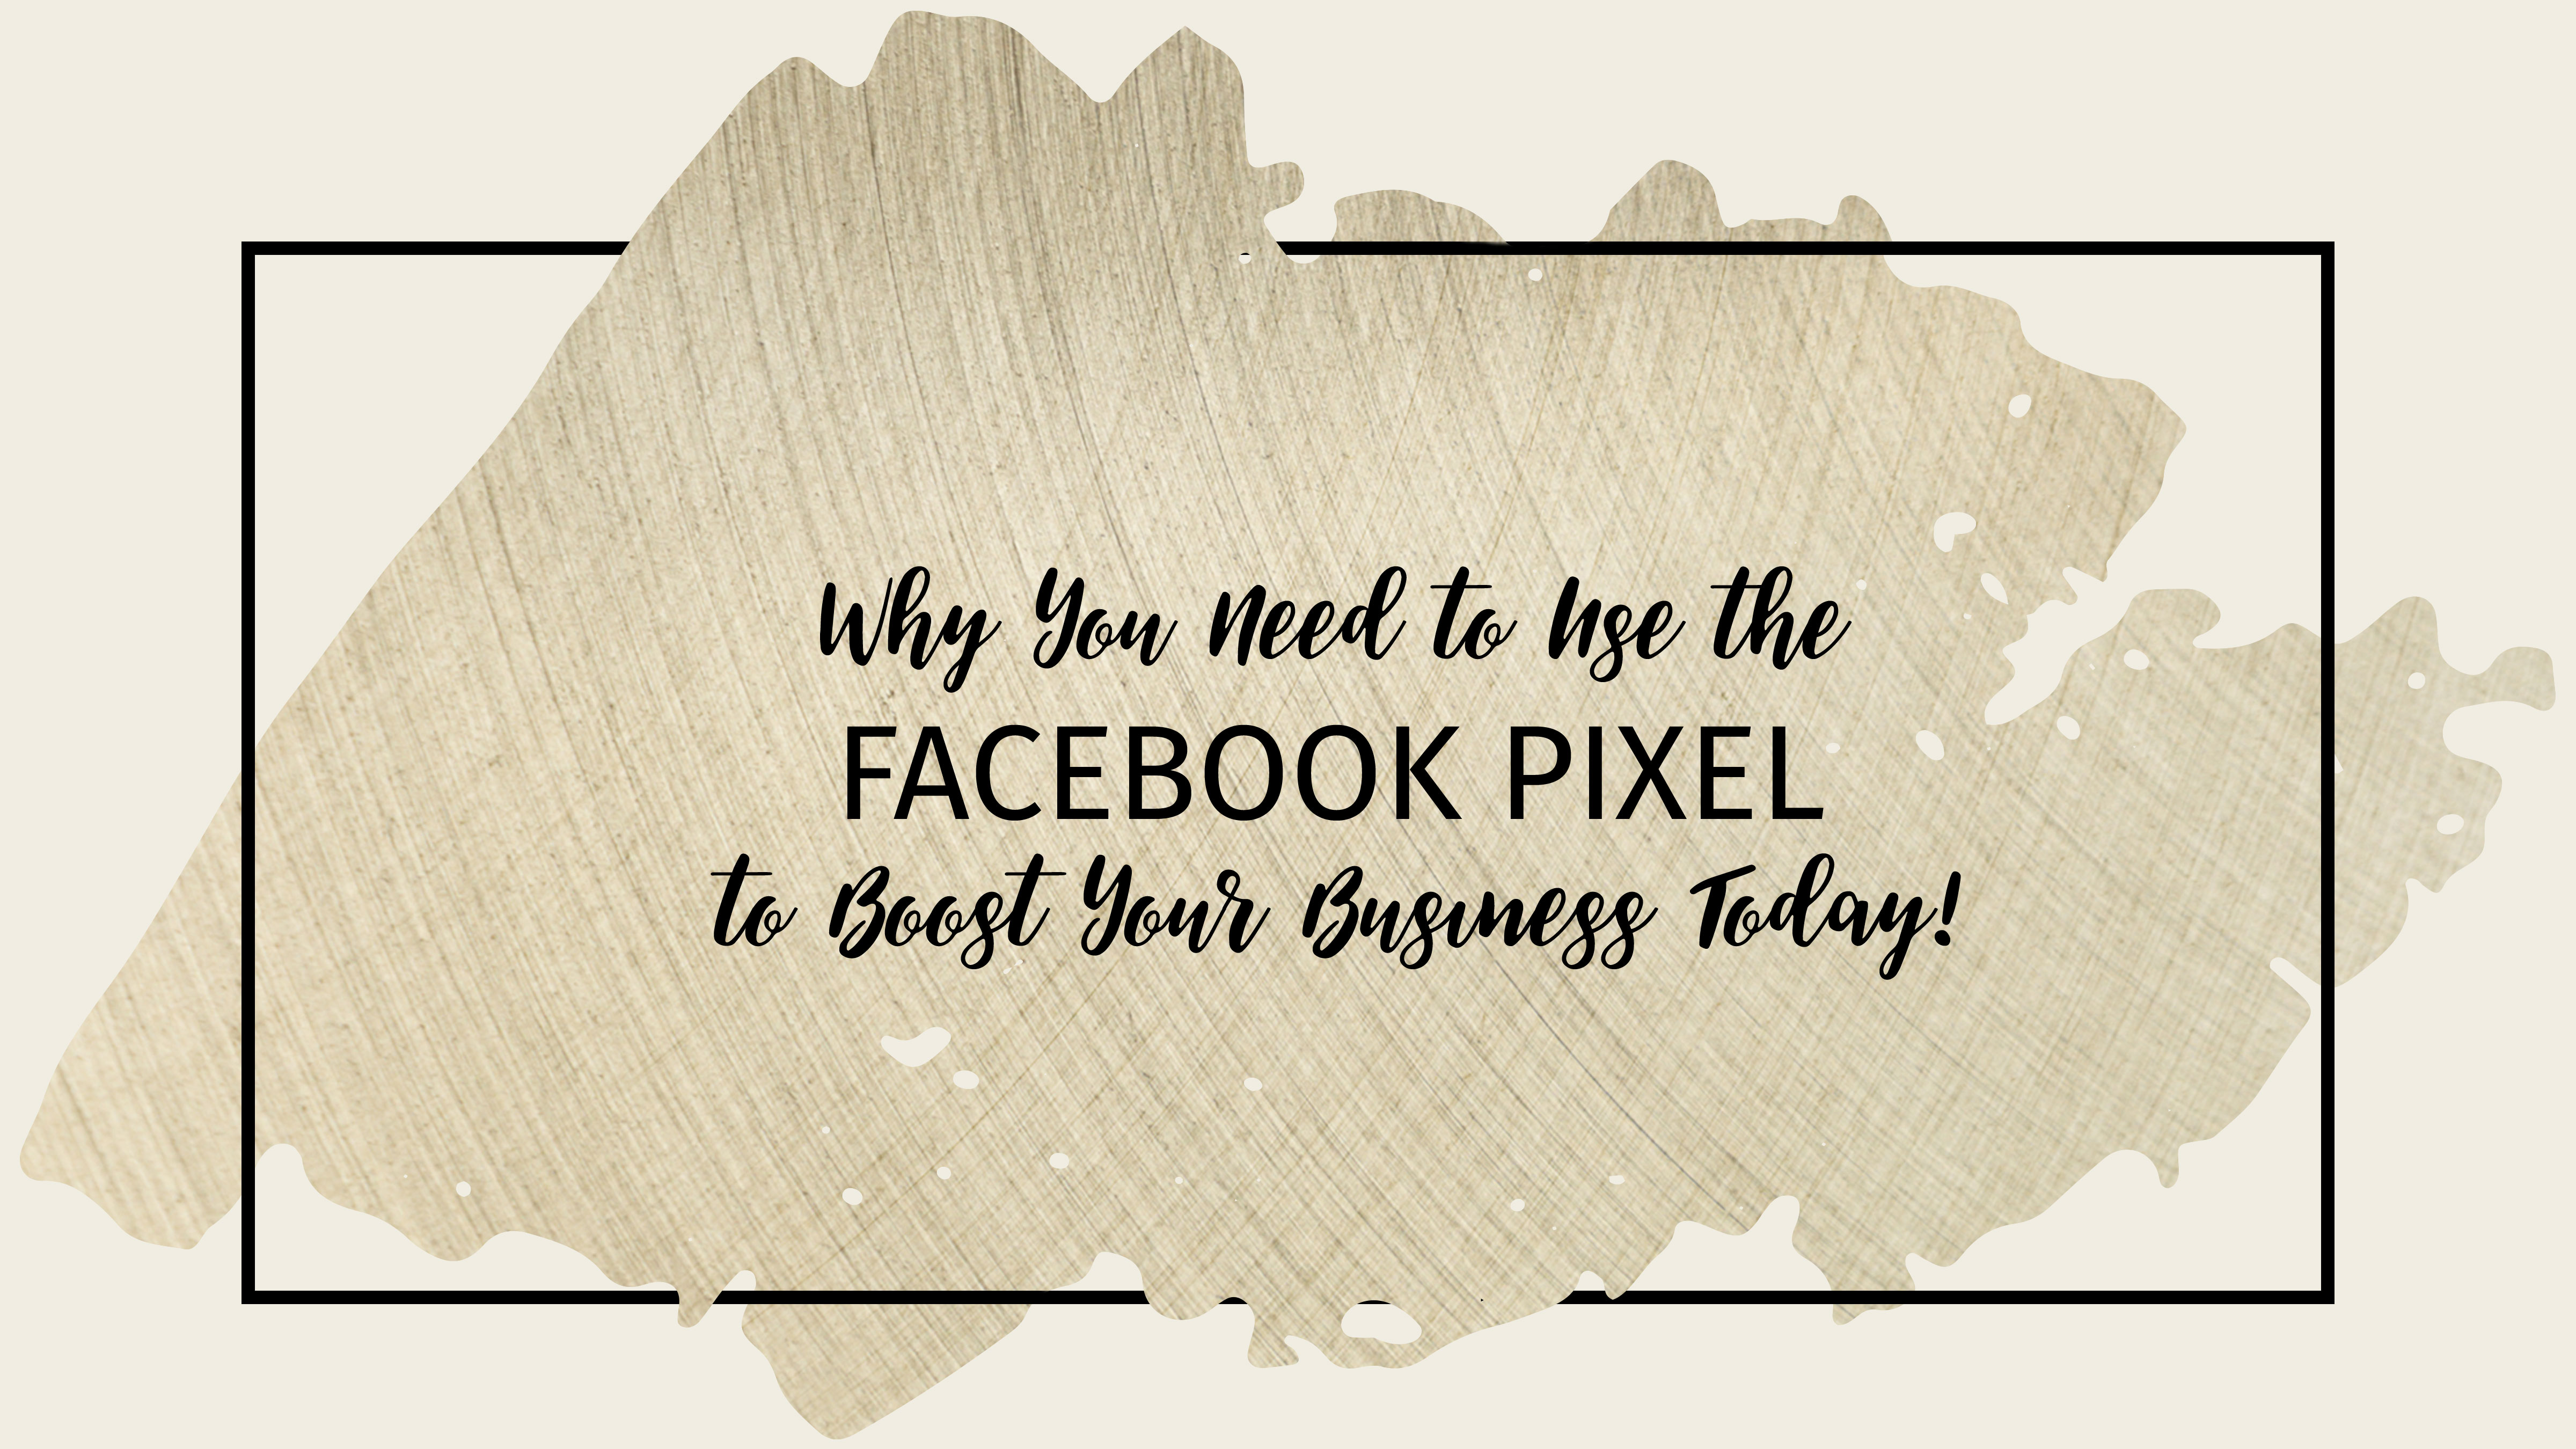 Text that reads "Why you need to use the facebook Pixel to boose your business today!" over a gold and beige background